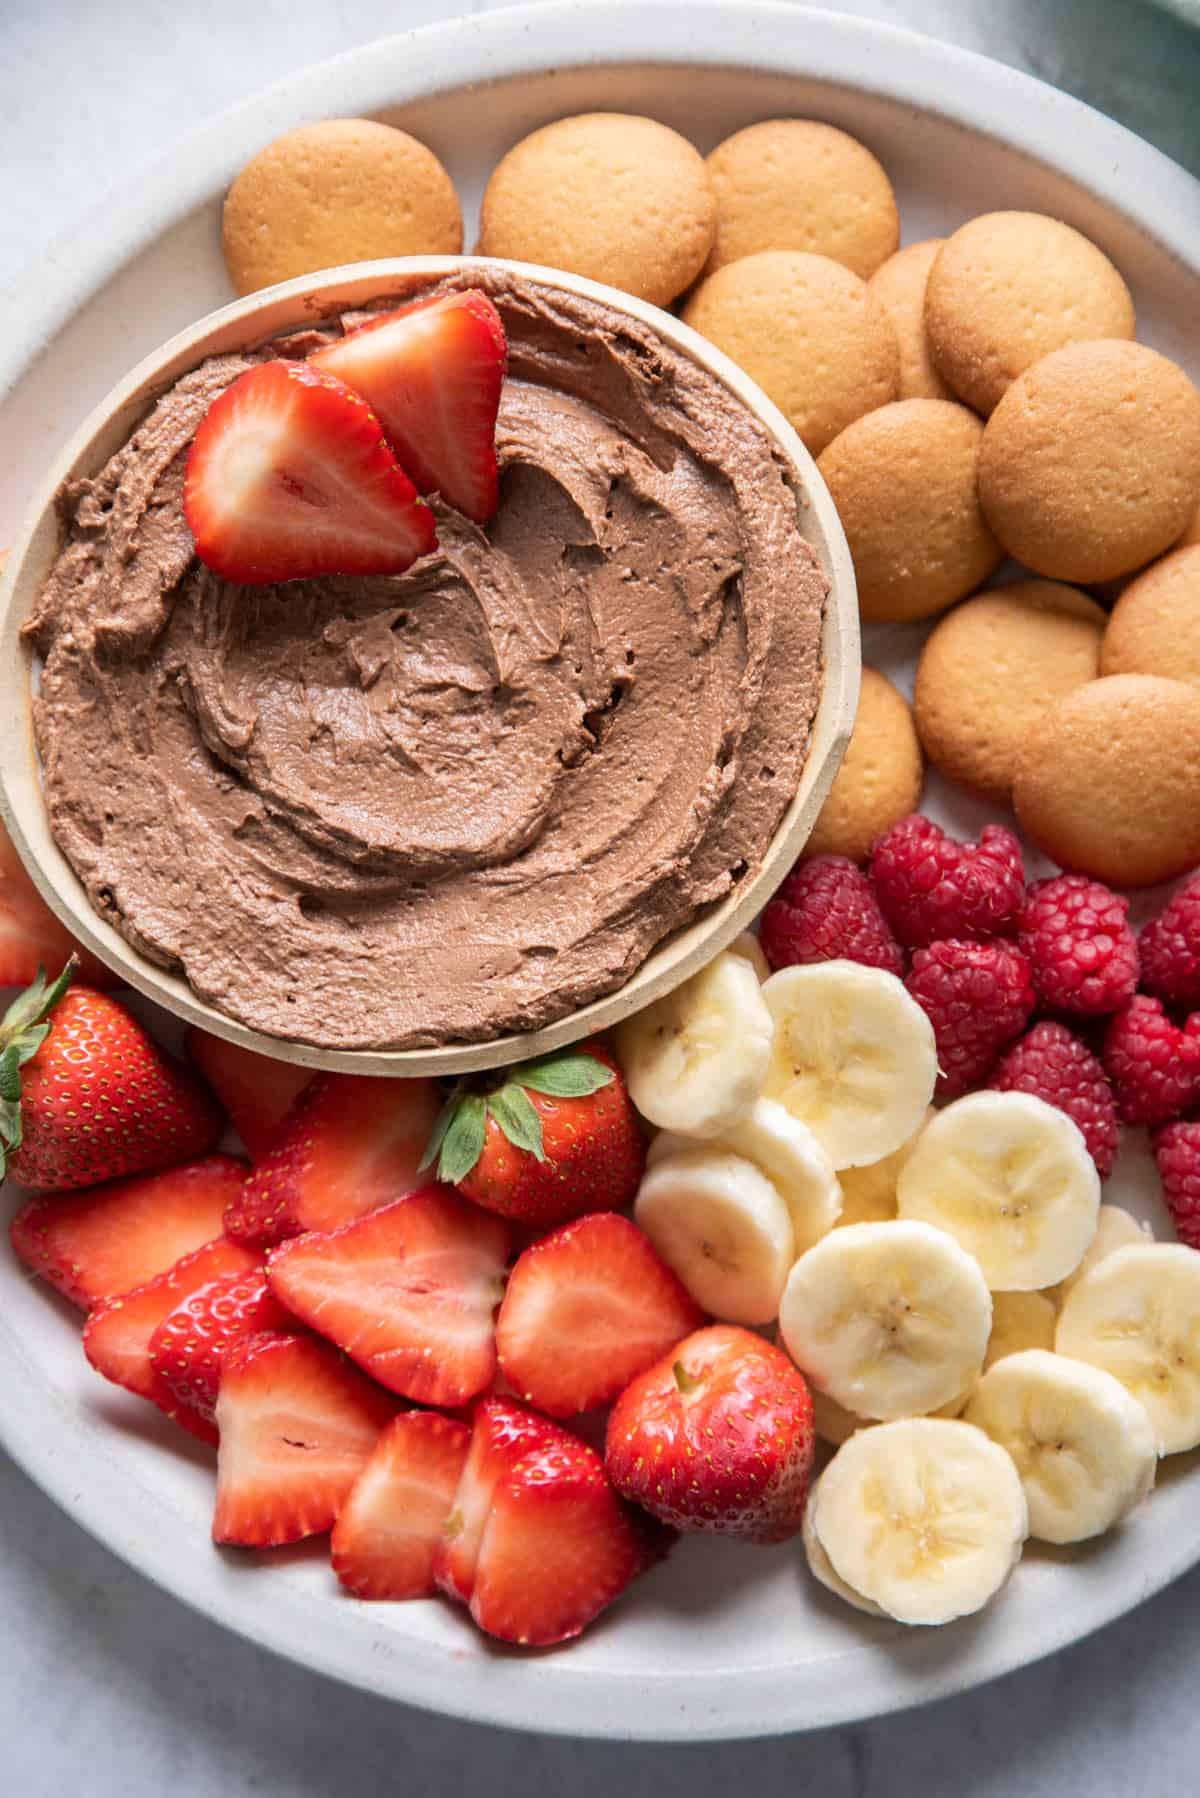 chocolate peanut butter dip with strawberries, bananas, raspberries and vanilla wafers for dipping